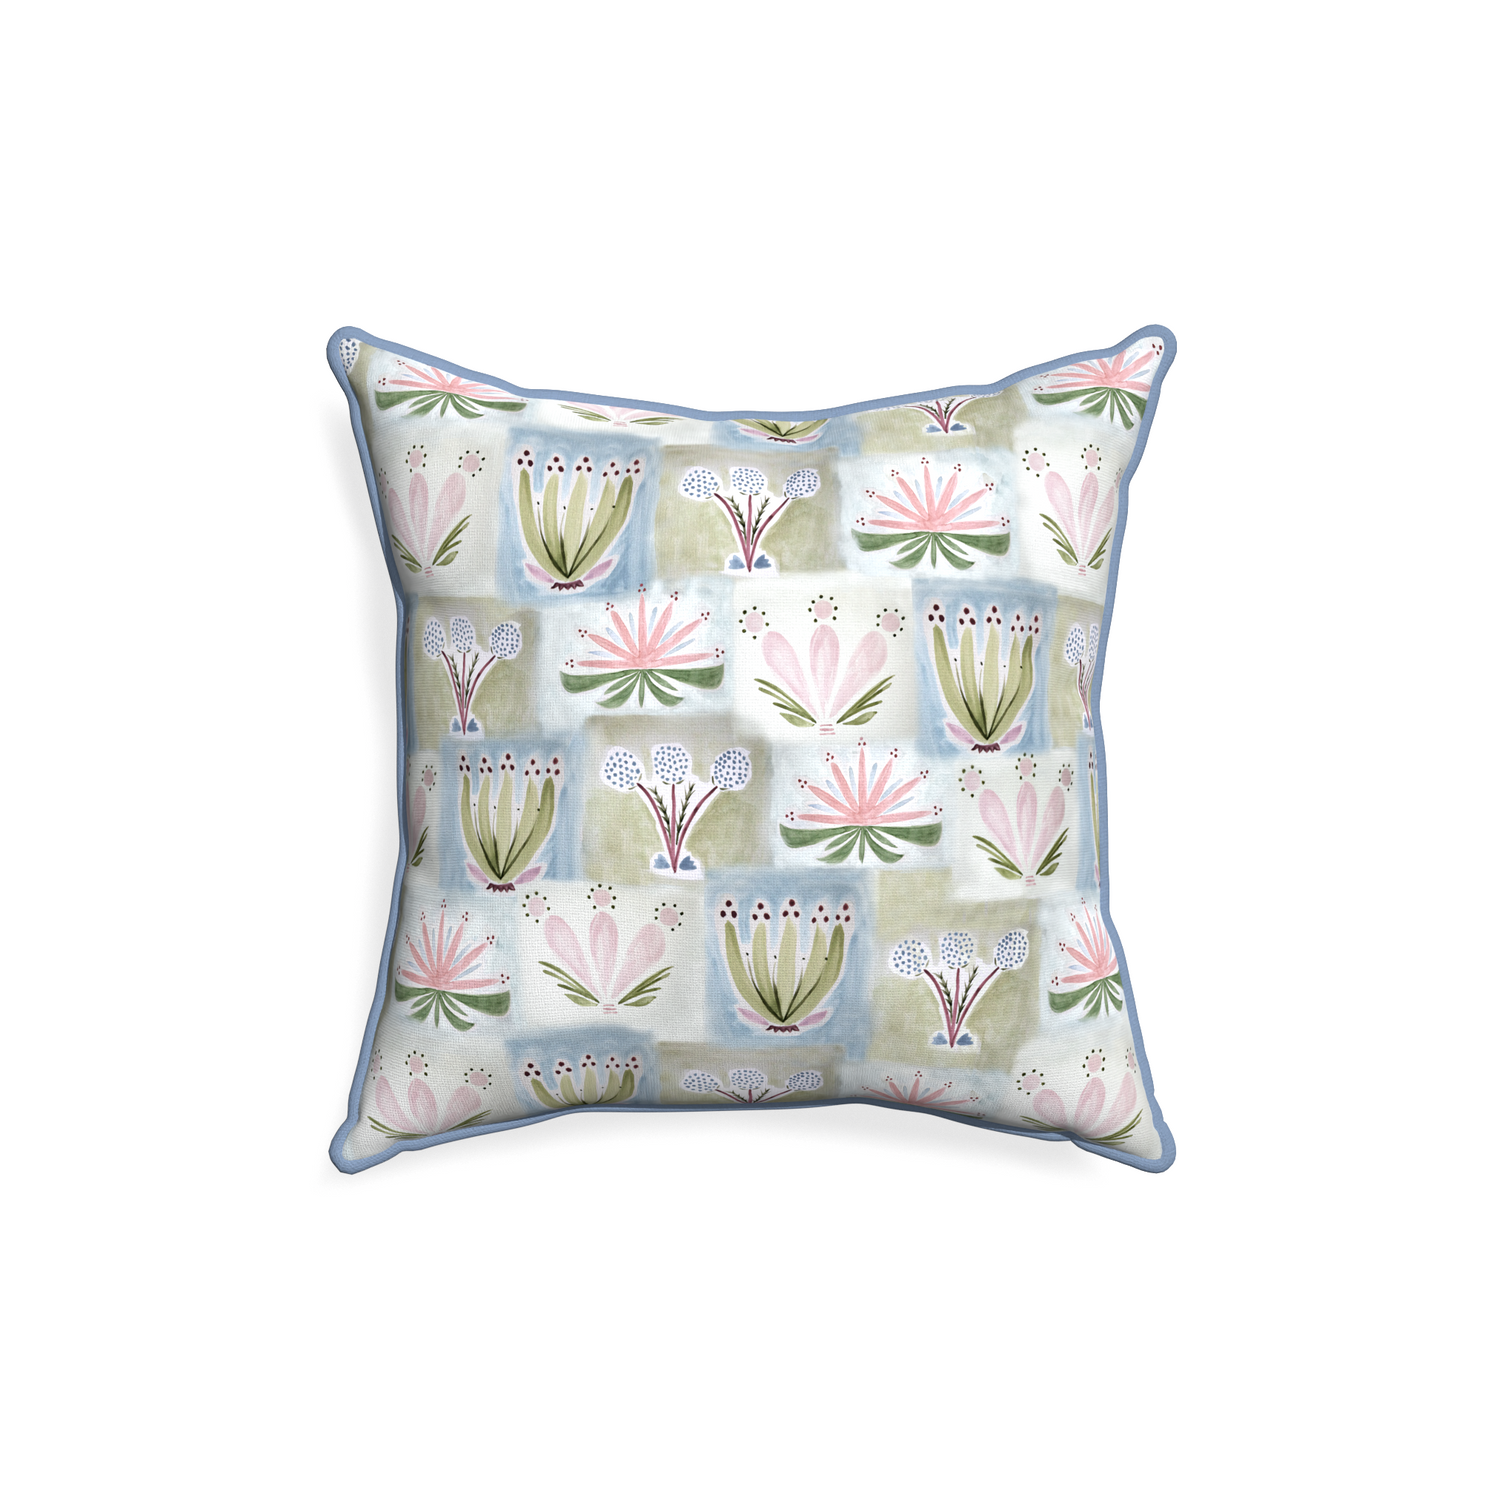 18-square harper custom hand-painted floralpillow with sky piping on white background